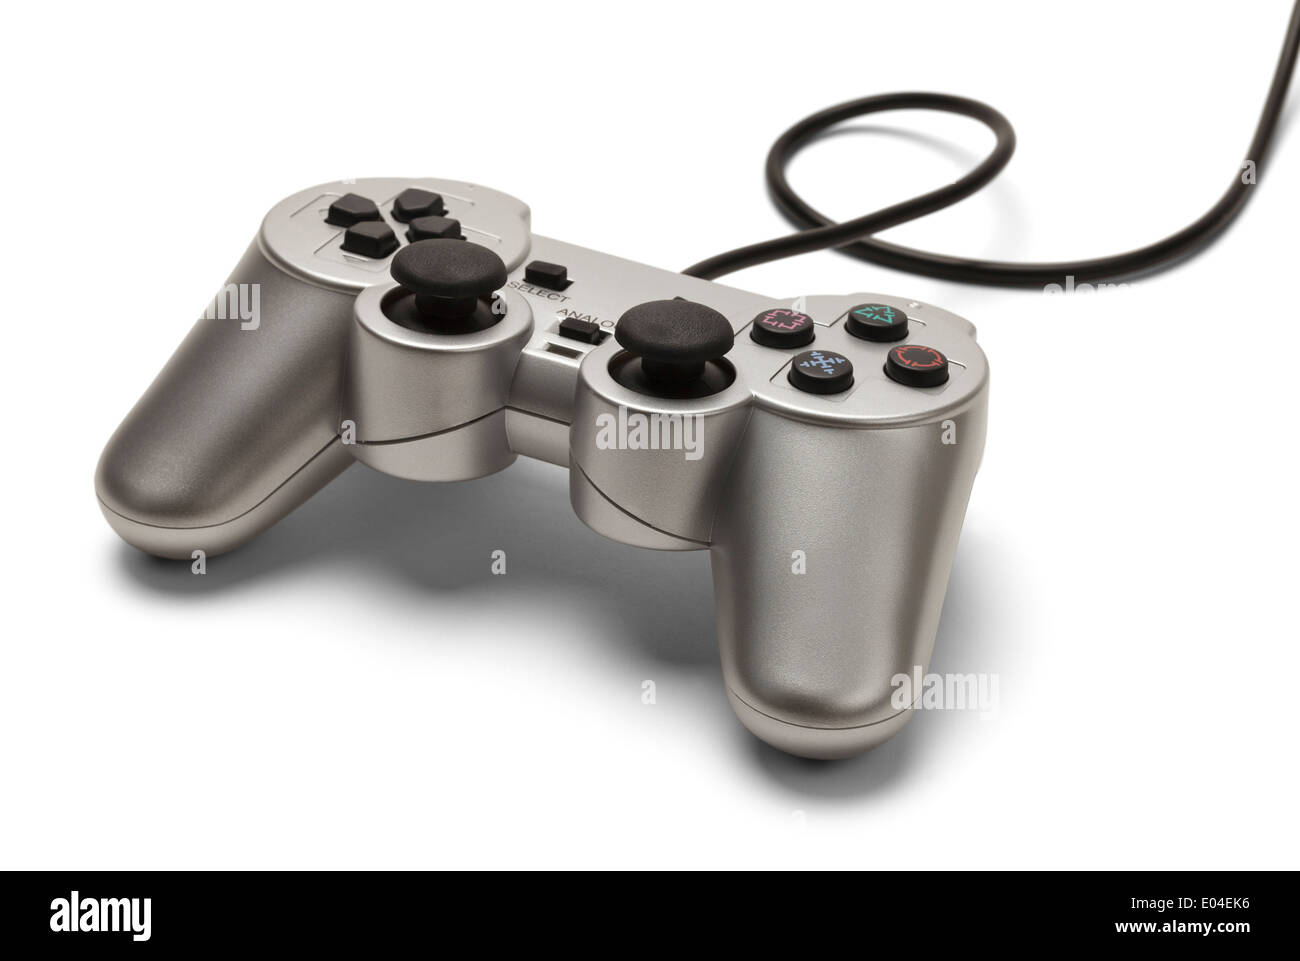 Silver Game Controller Isolated on White Background. Stock Photo